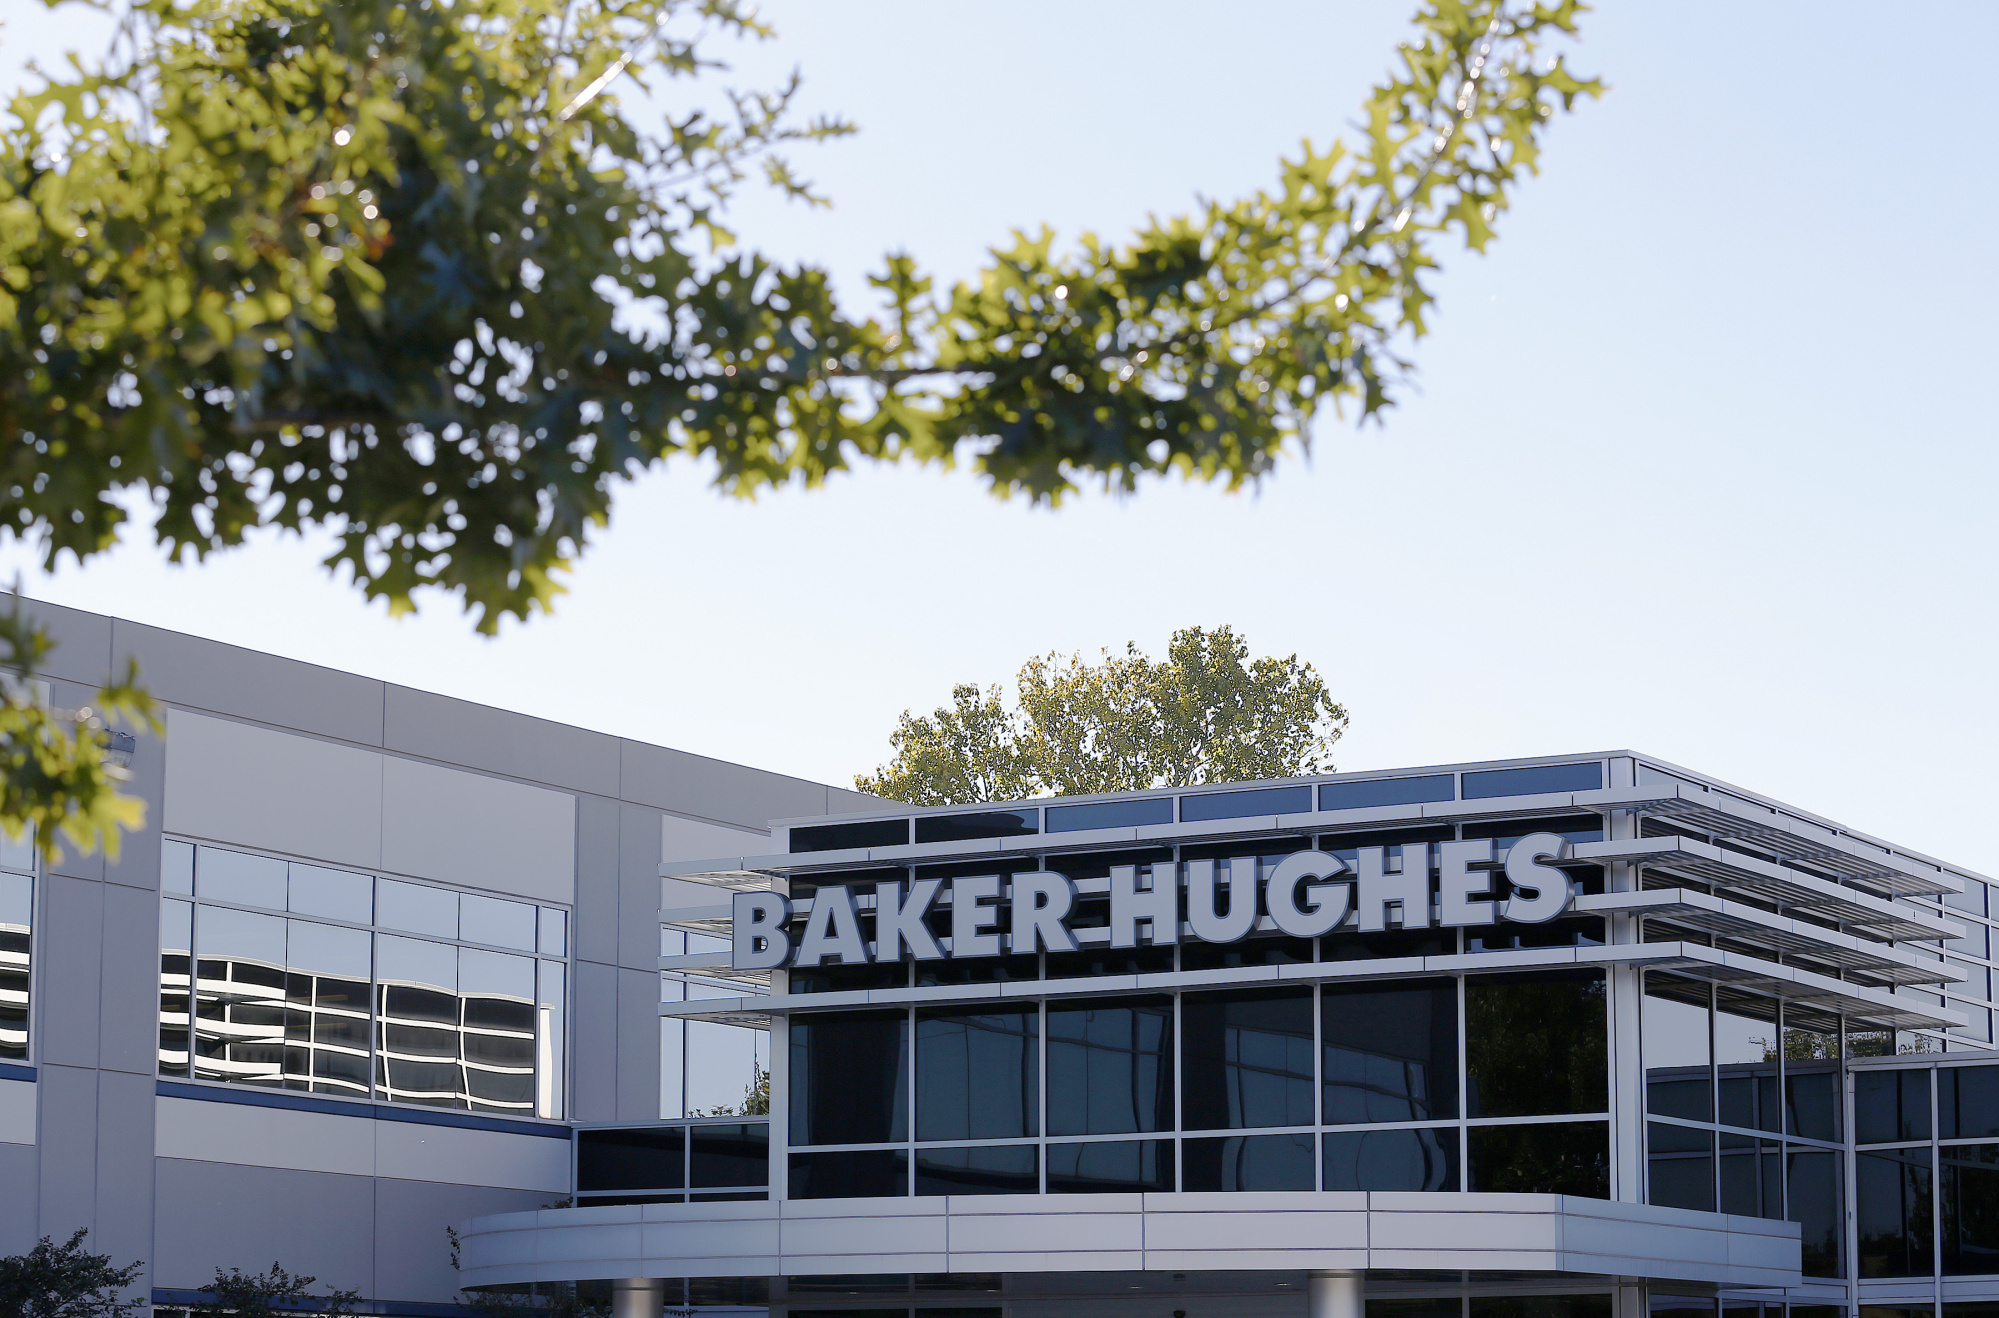 Baker Hughes Inc. signage is displayed at one of the company's facilities in Houston, Texas, U.S. Photographer: Aaron M. Sprecher/Bloomberg